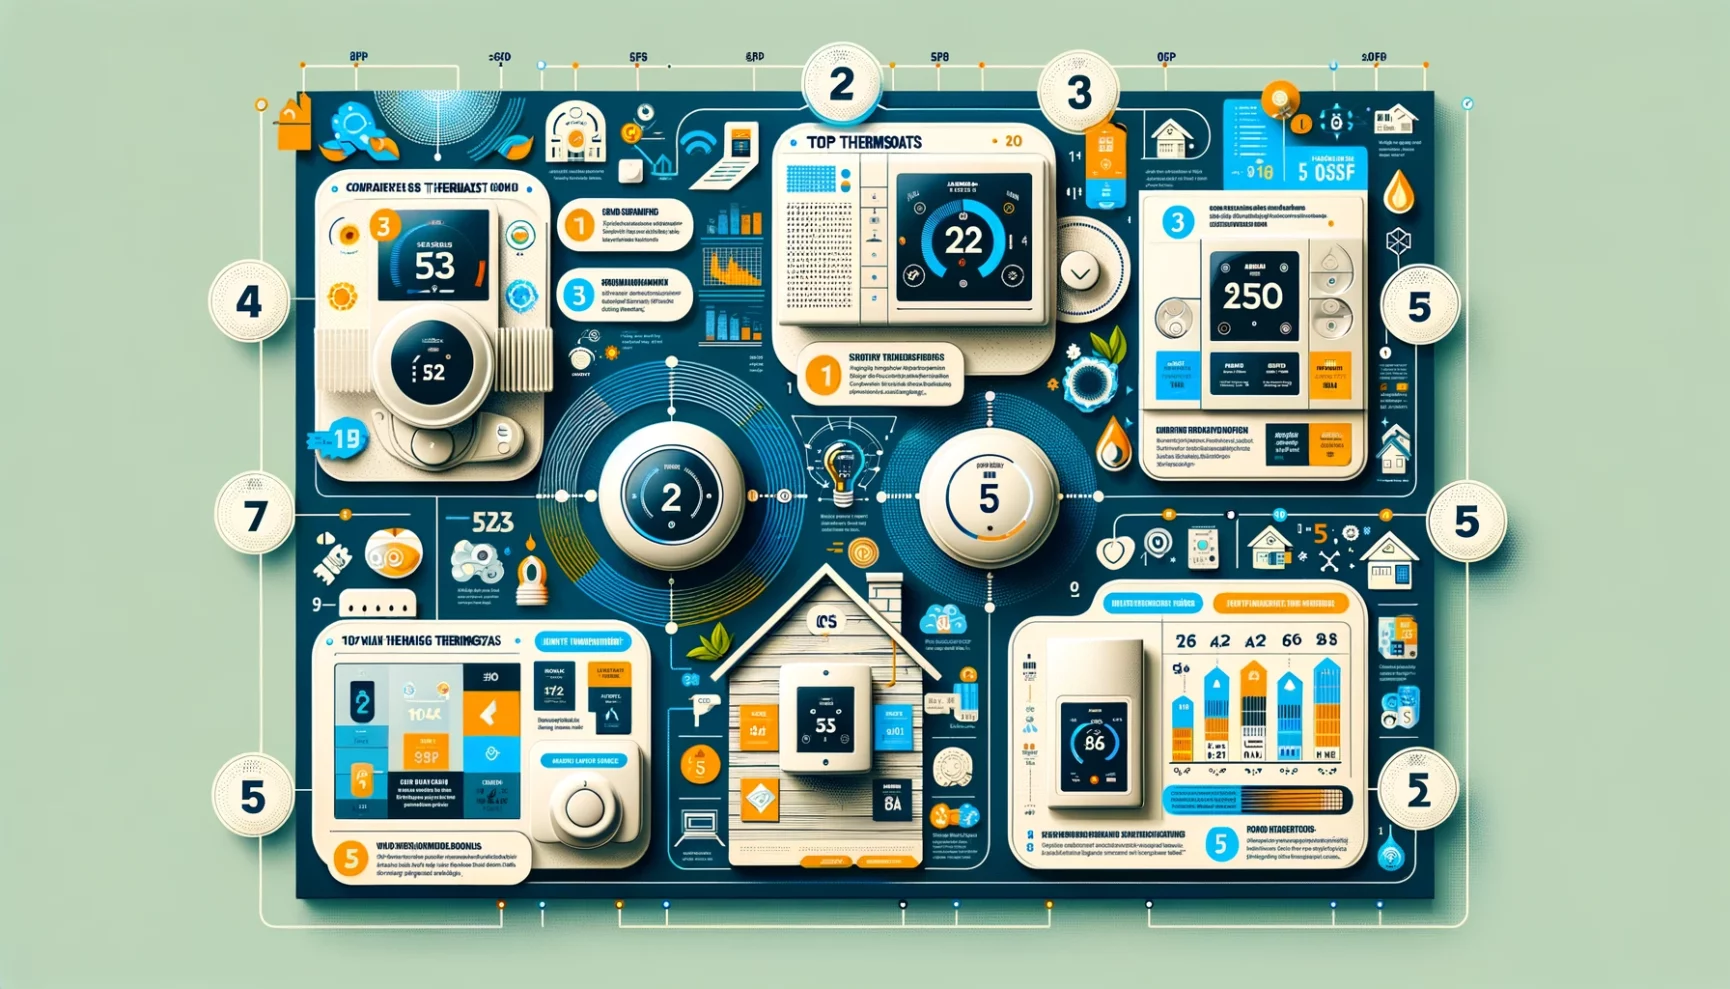 An infographic poster showcasing a variety of smart home devices and statistics, styled in a colorful and detailed isometric design.